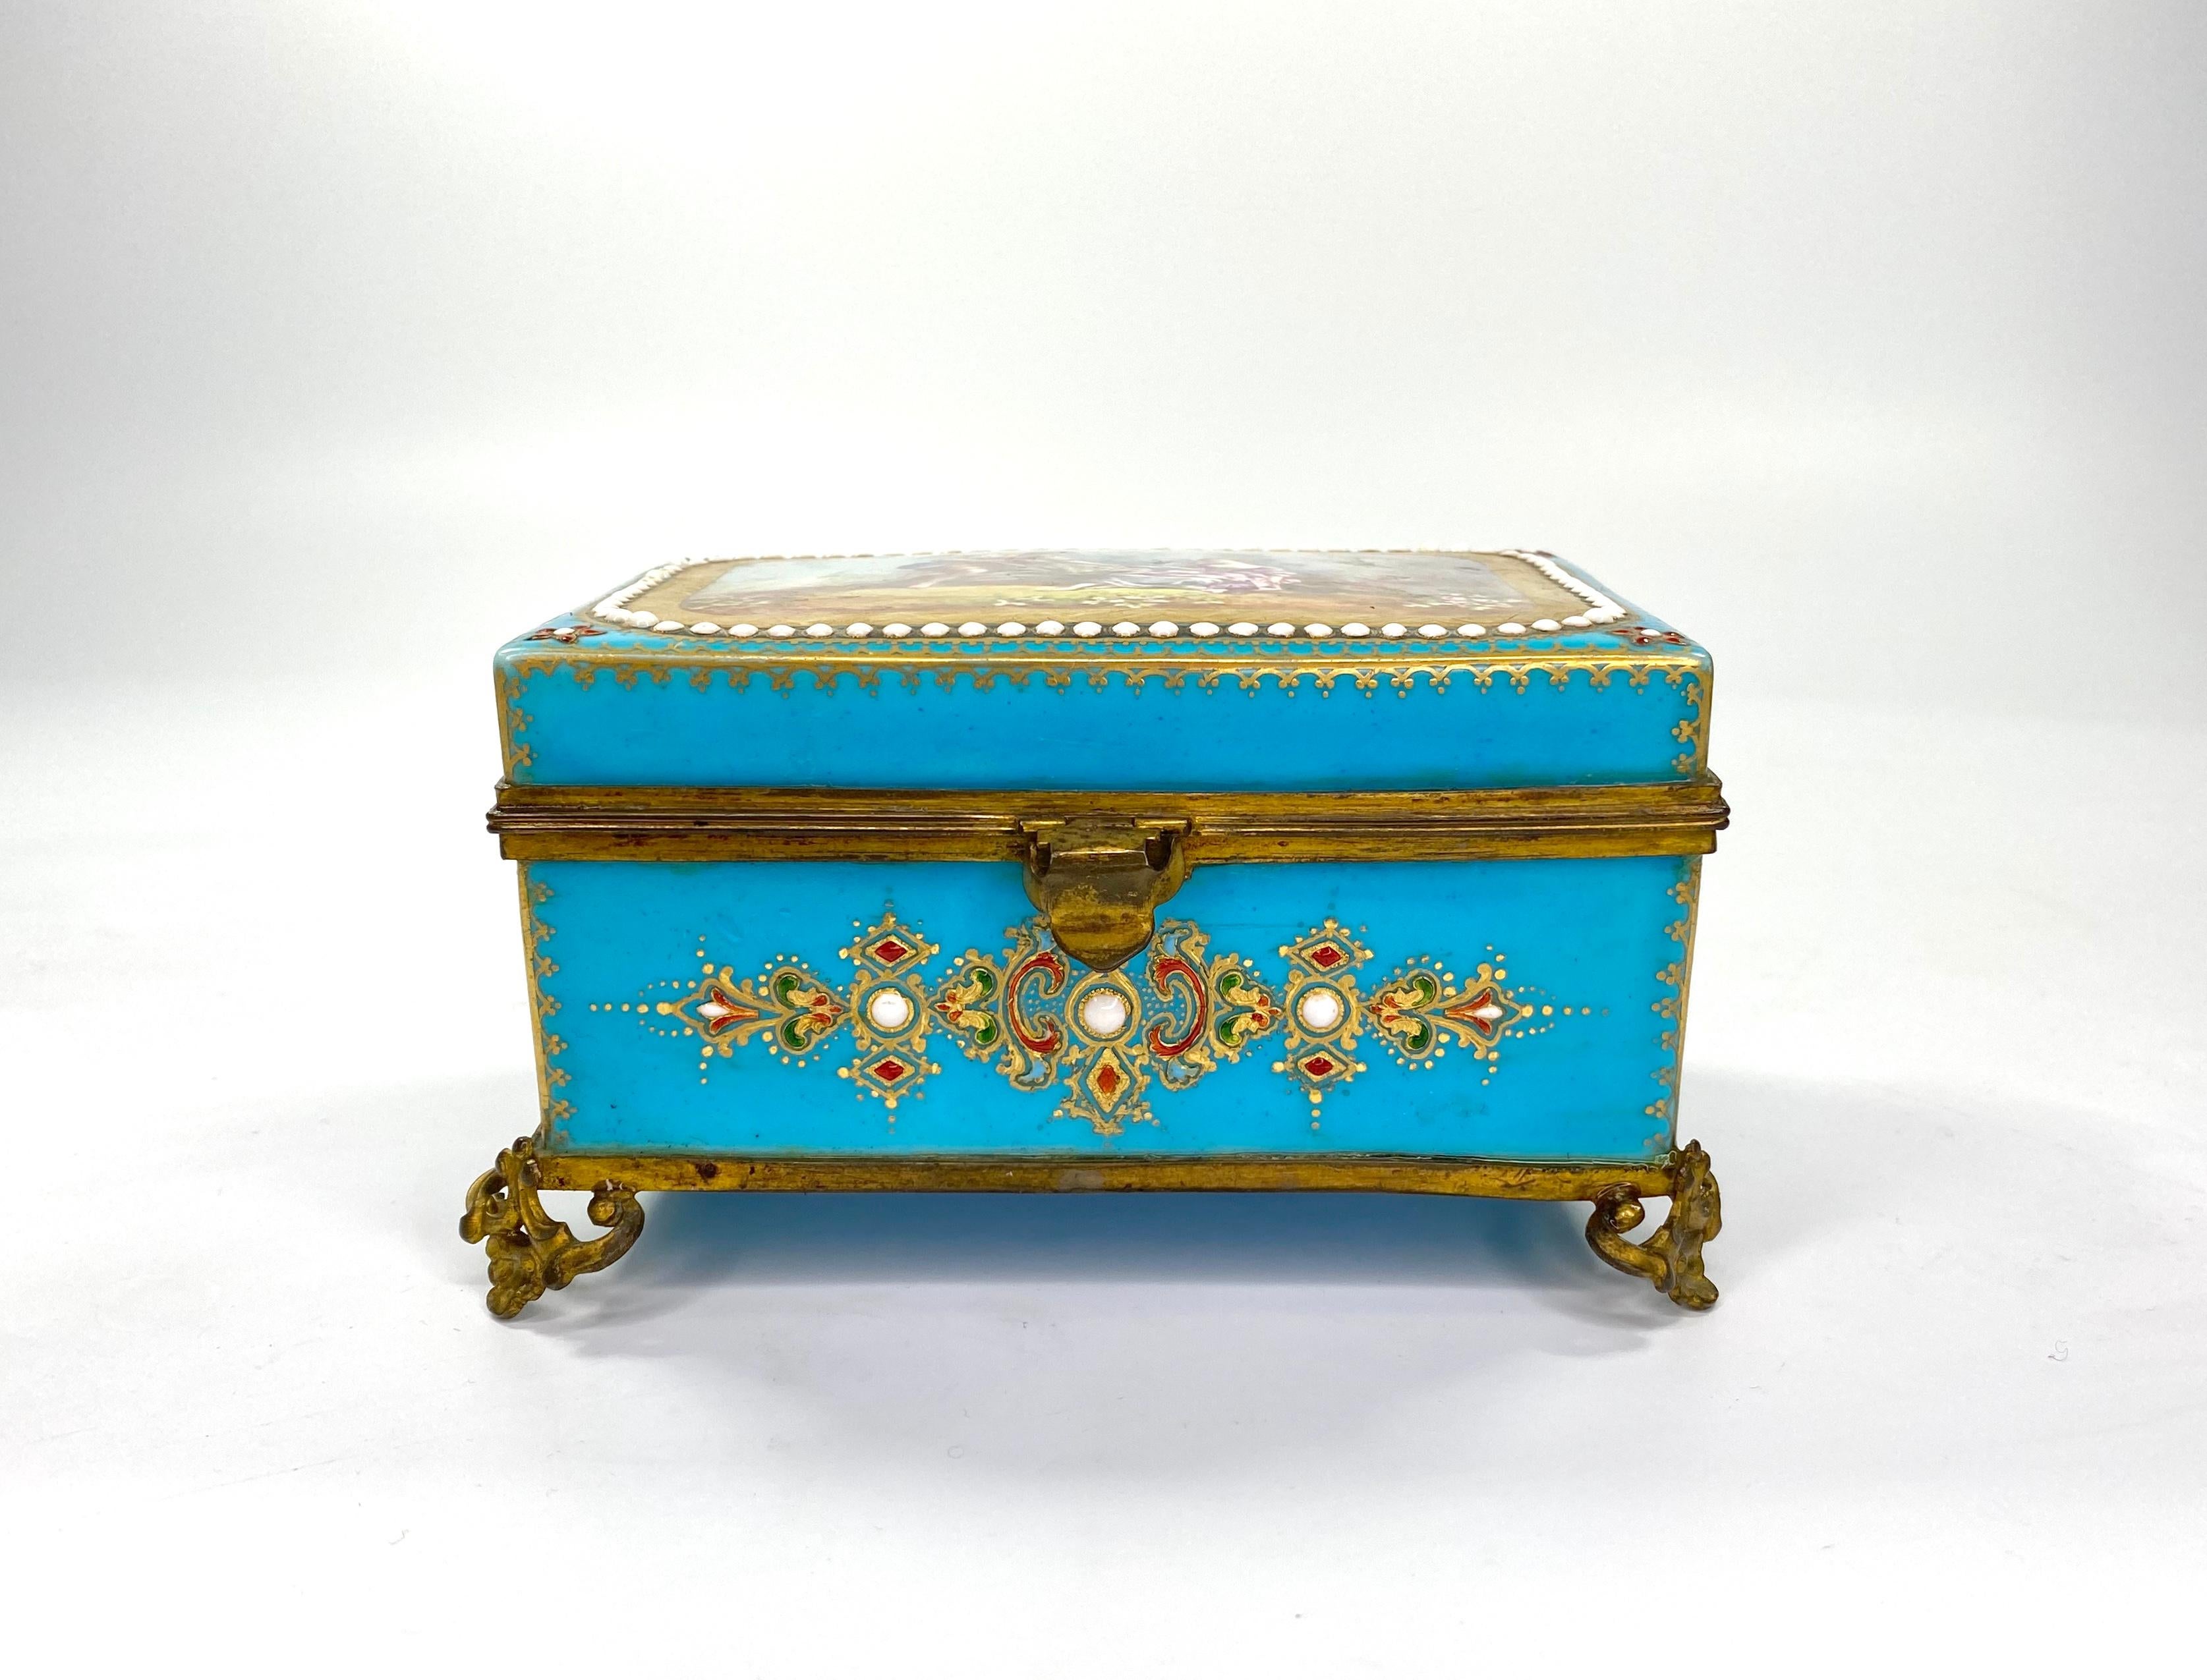 A fine ‘Sèvres’ porcelain ‘Jewelled’ casket, with ormolu mounts, circa 1880. The rectangular casket, well painted to the cover, with a scene of rustic lovers, wearing 18th century costume, in a garden setting, within a tooled gilt, and white enamel